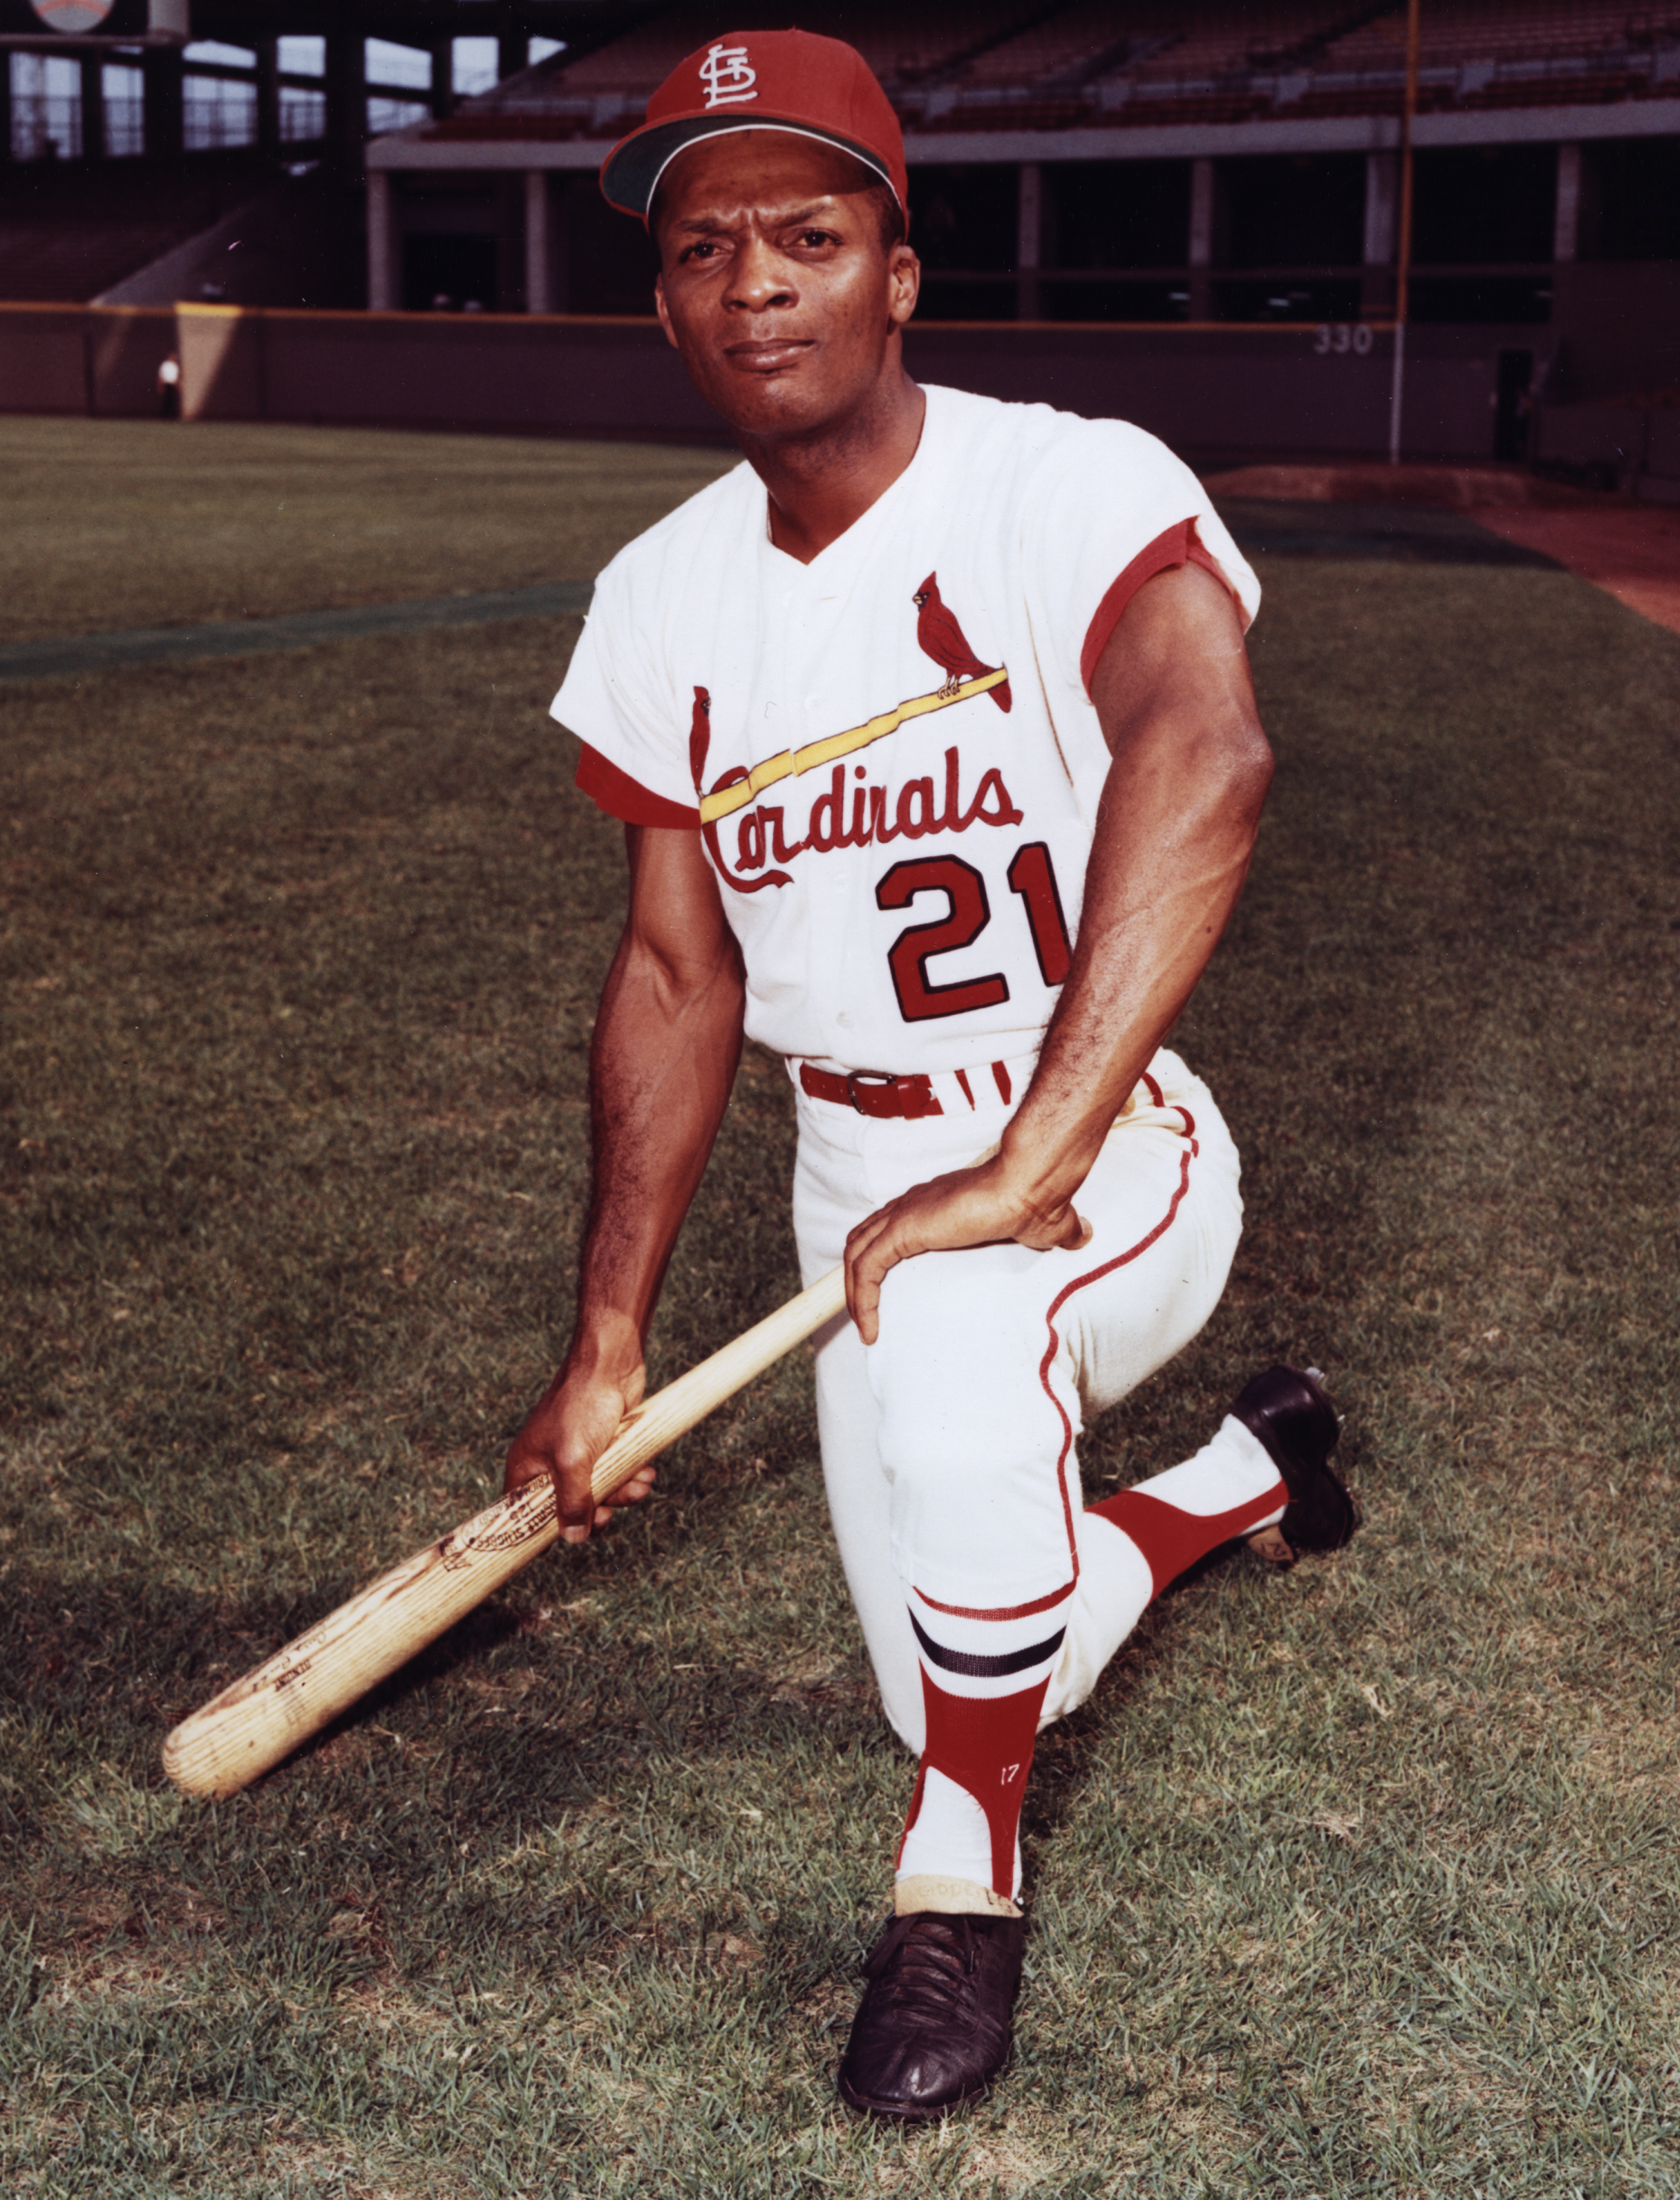 Curt Flood's Baseball Cards – Society for American Baseball Research